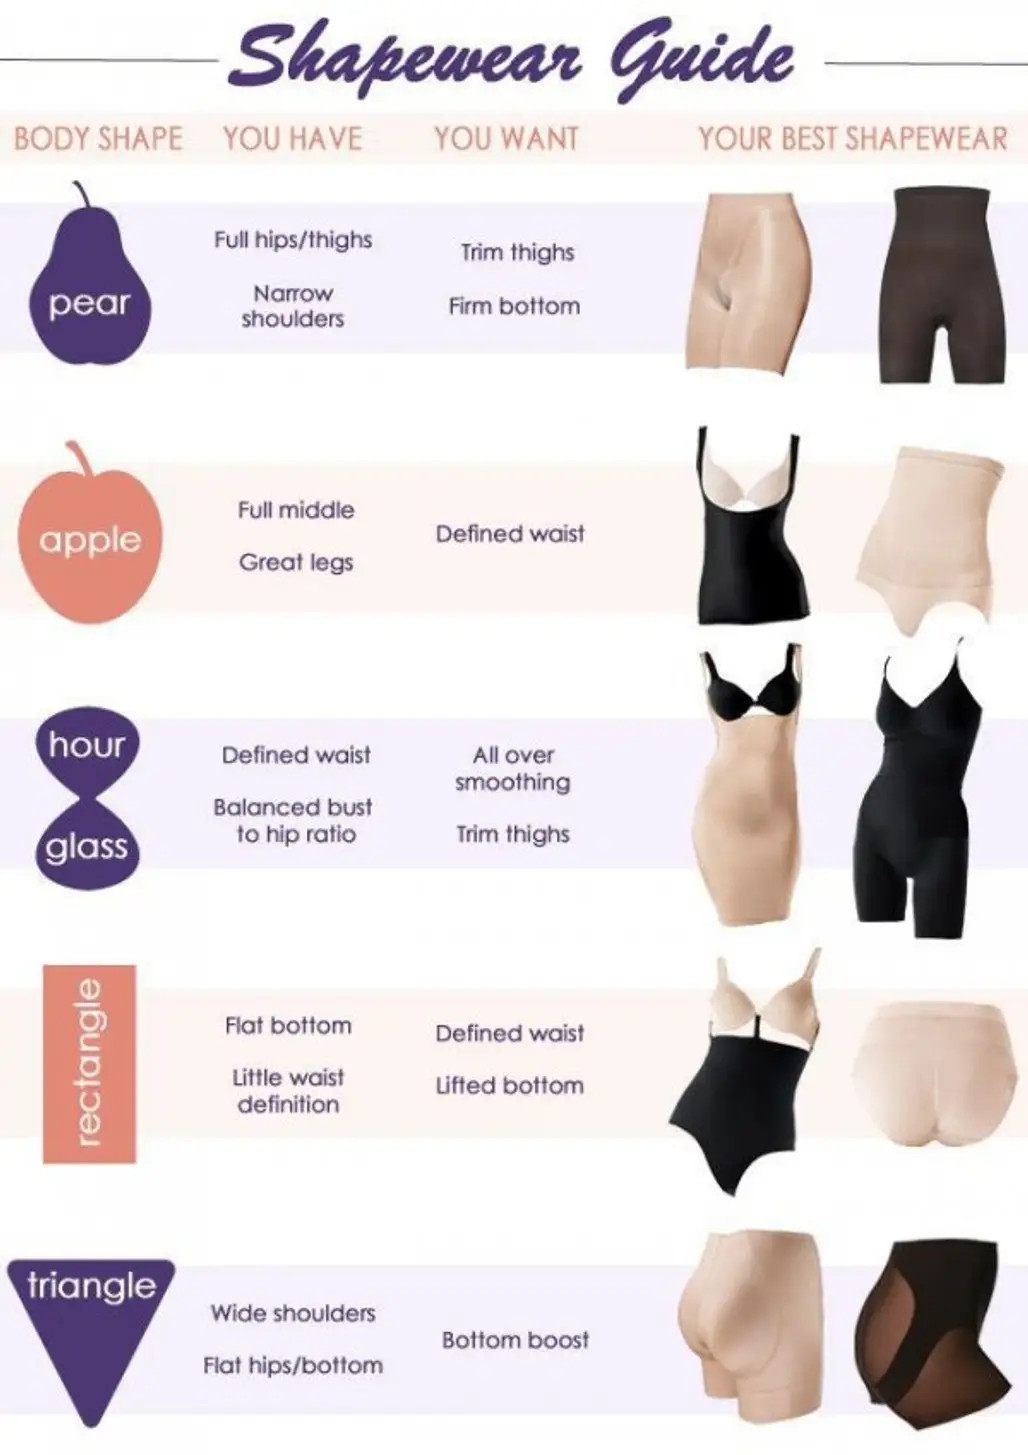 Fashion in Infographics  Apple body shapes, Body shapes, Fashion